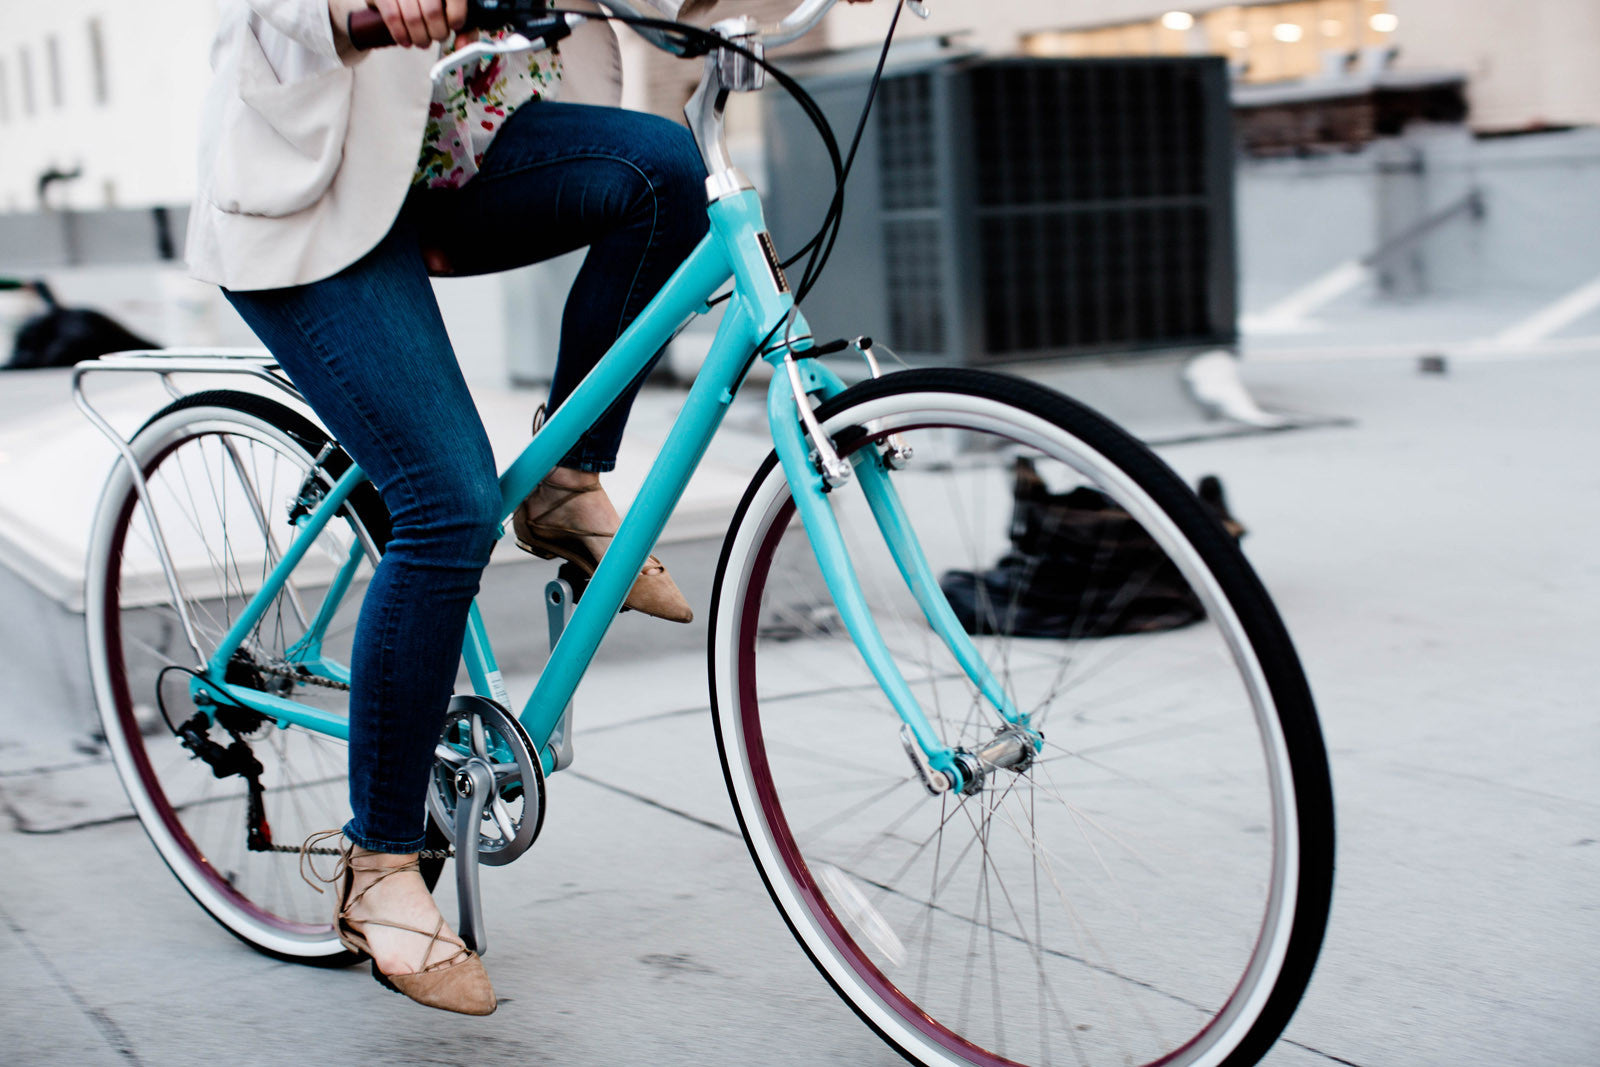 Do You Have Any Women’s 1 Speed Bikes Available in Teal?